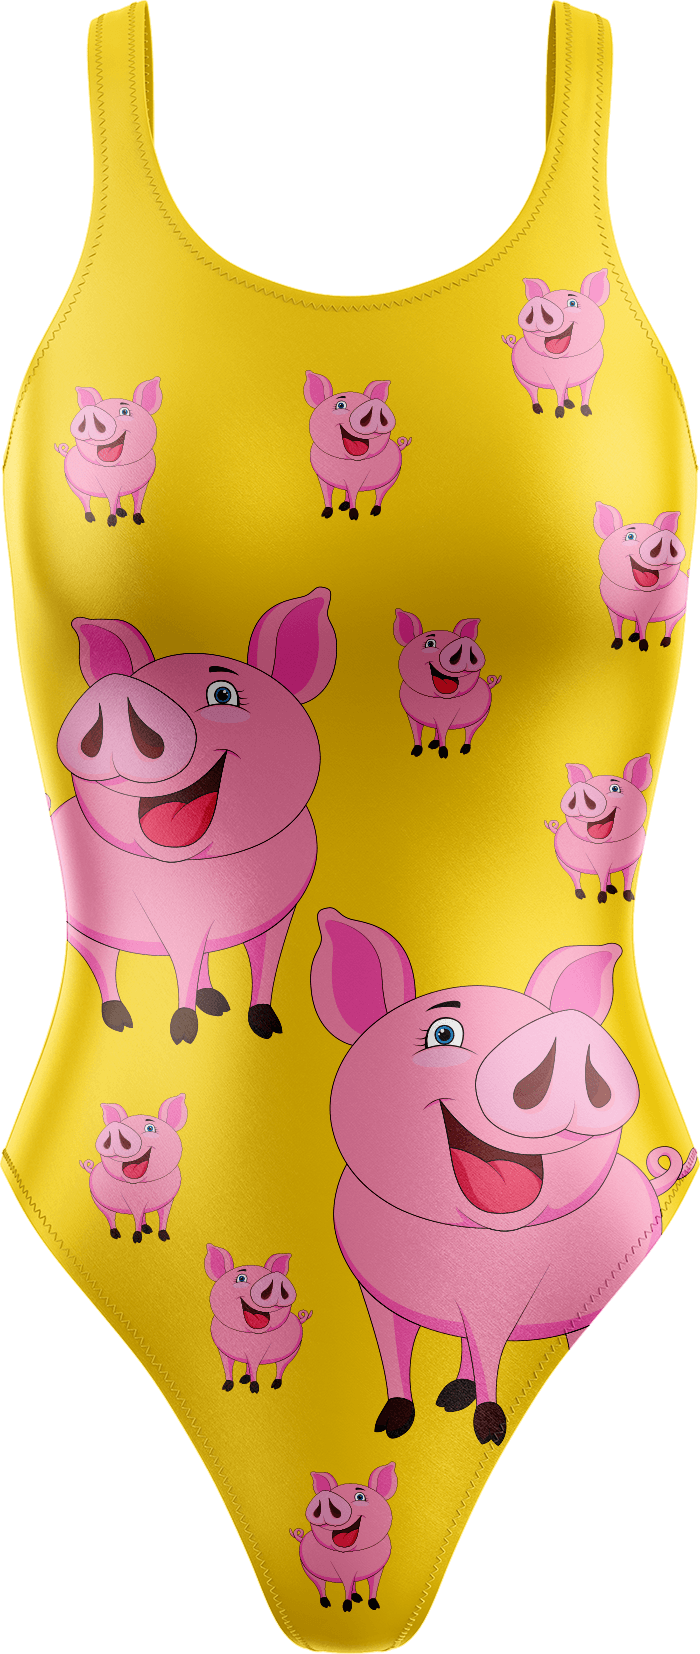 Percy Pig Swimsuits - fungear.com.au